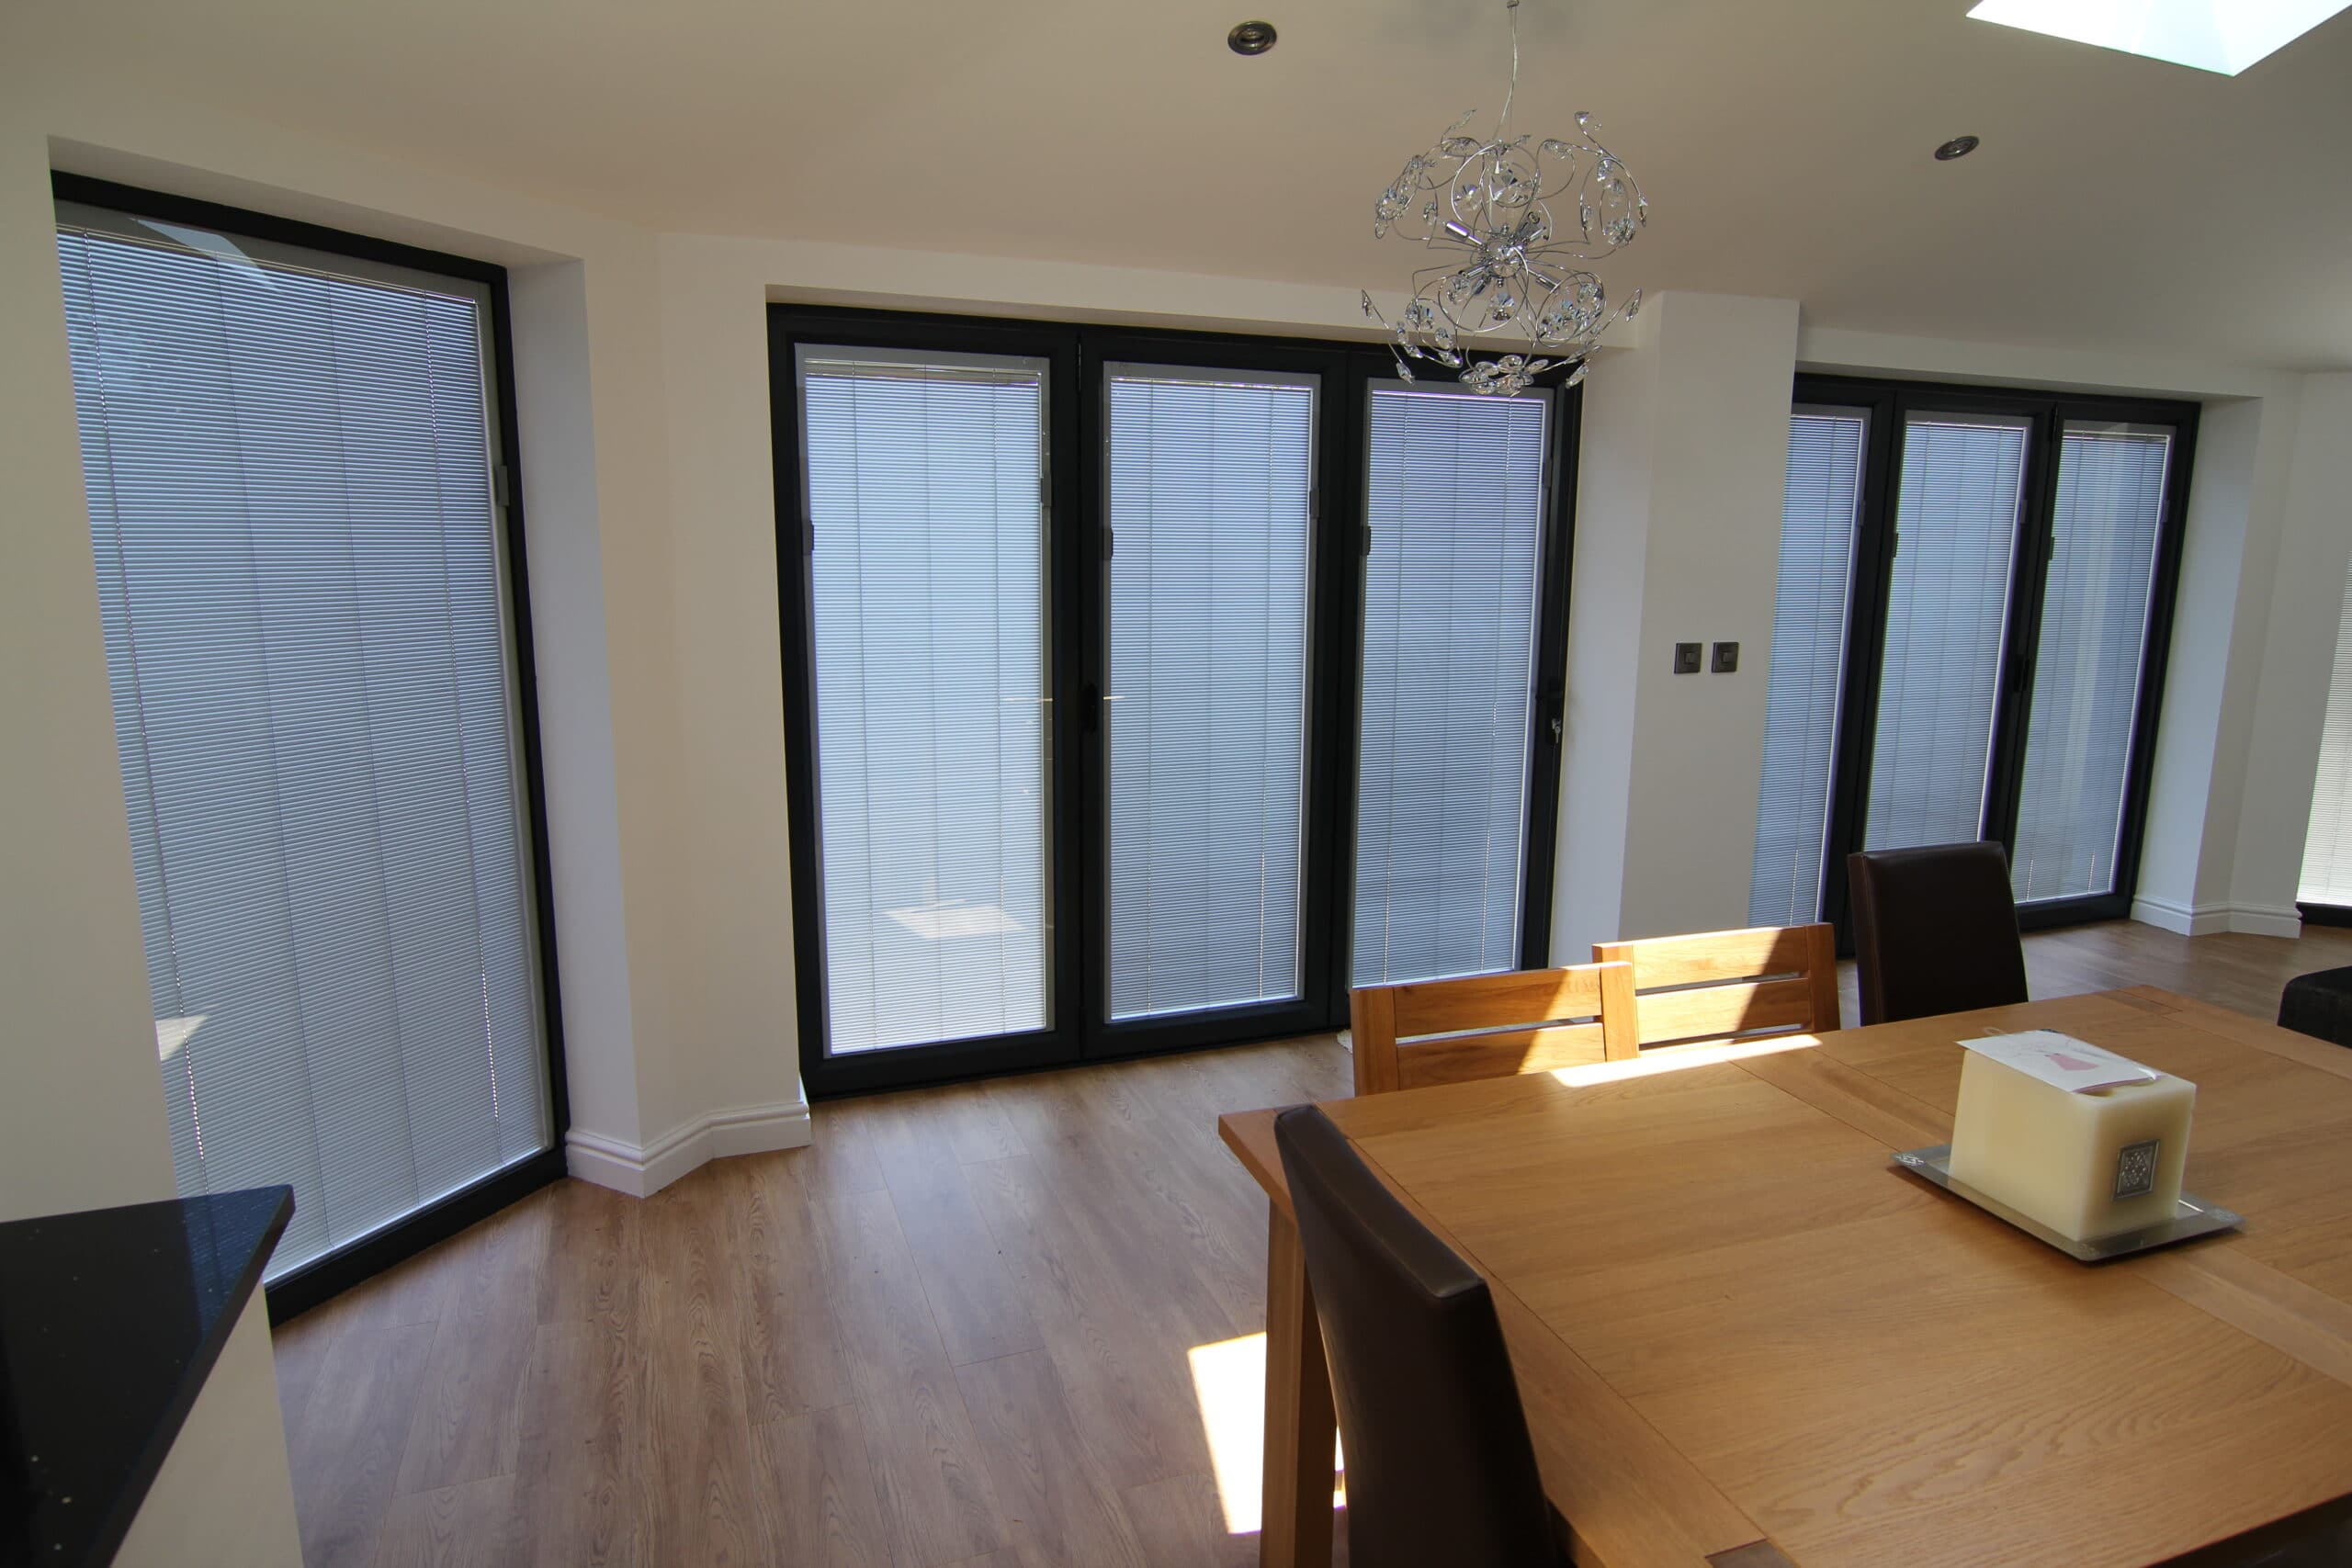 new bifolding doors with closed blinds in a dining room